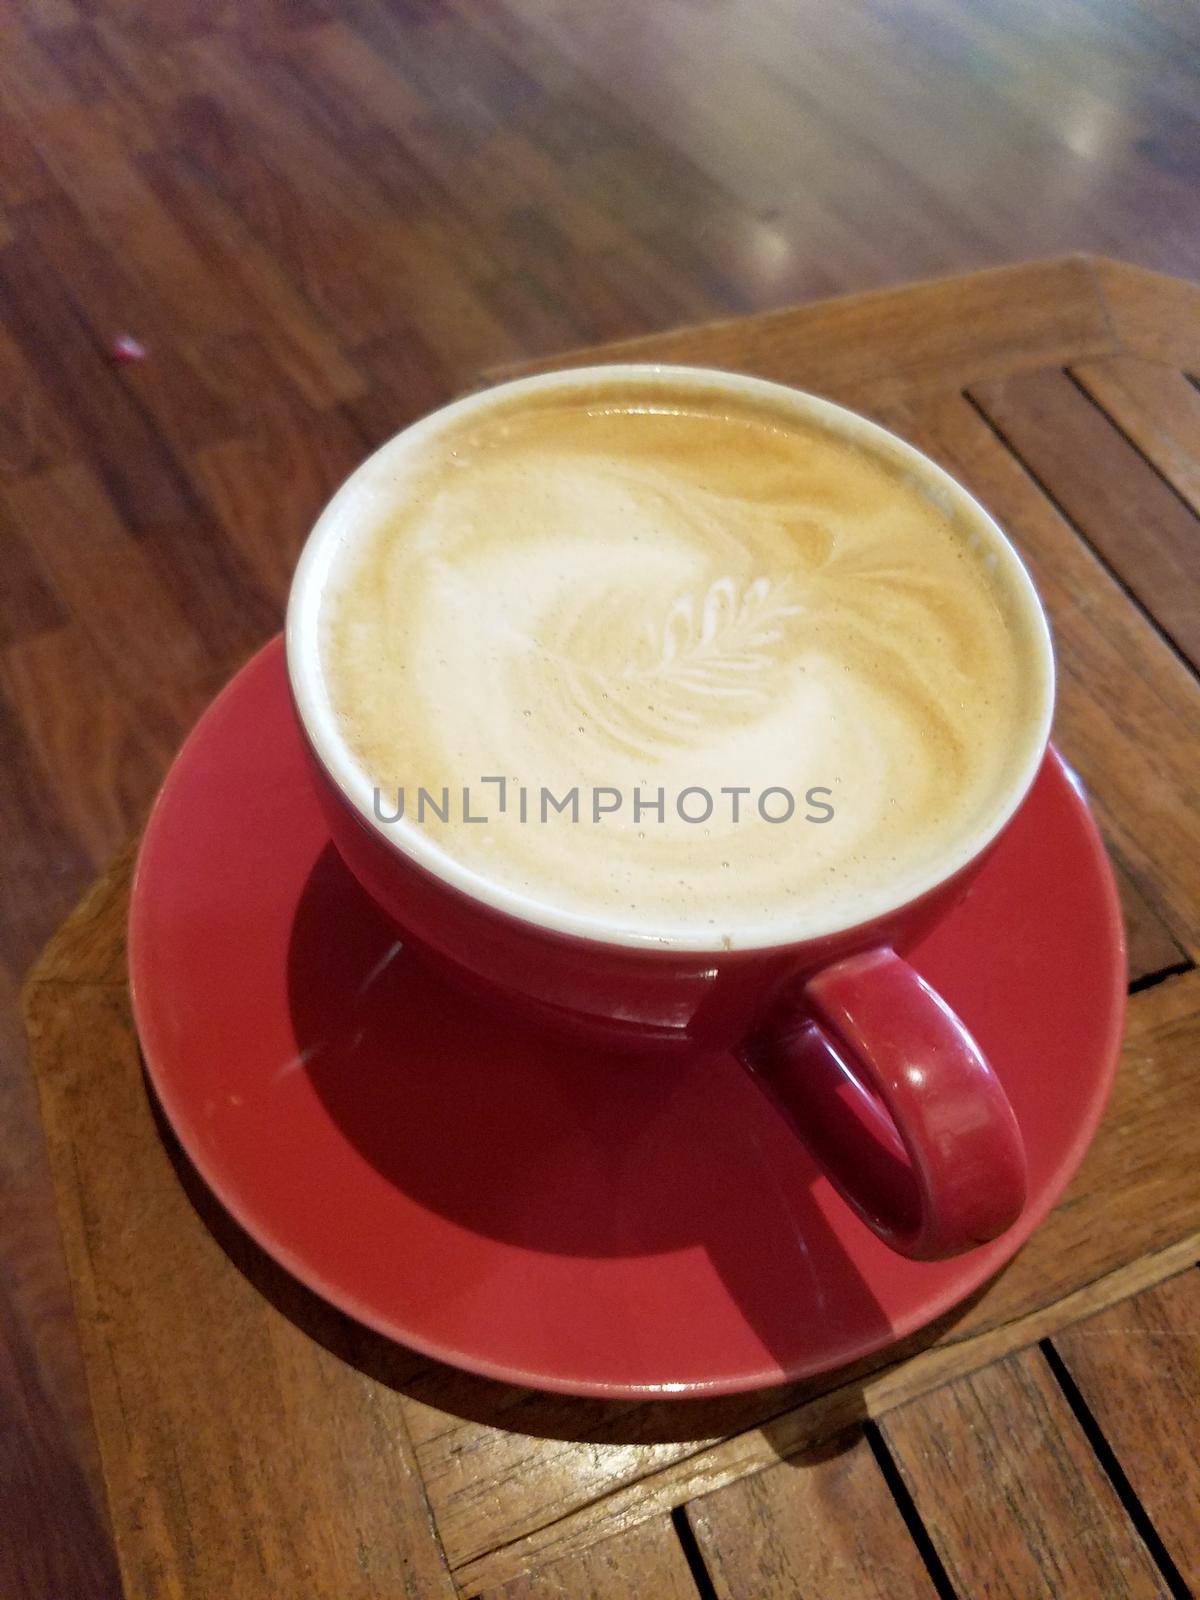 Red cup of Cappuccino on saucer with a leaf pattern in foam on table.